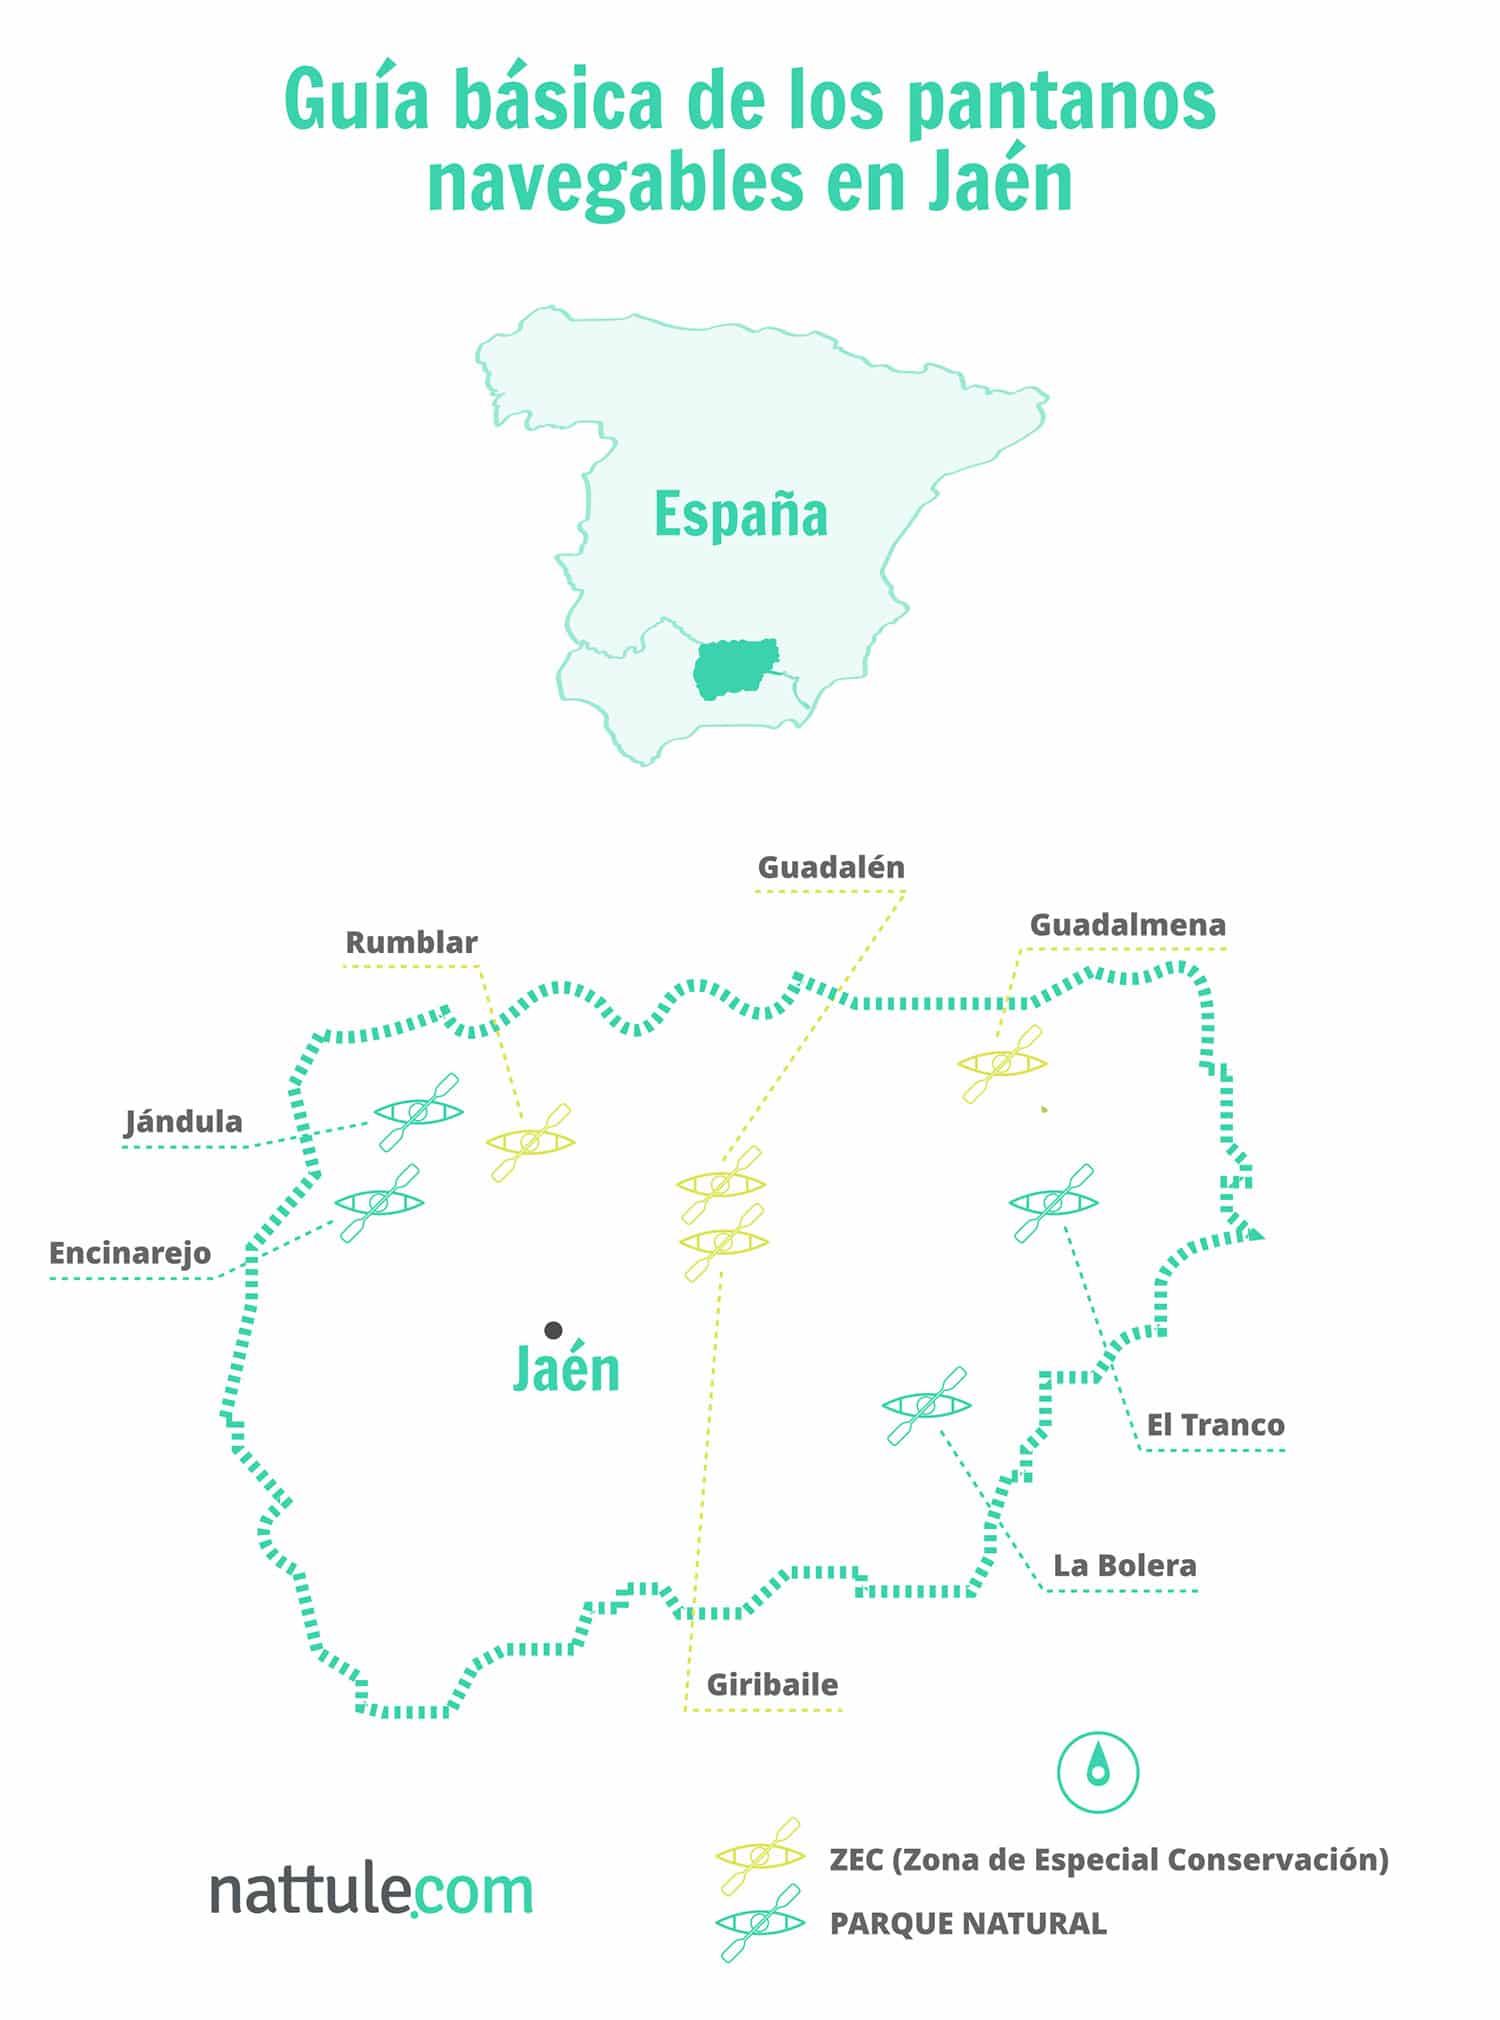 Basic guide to navigable swamps in Jaén